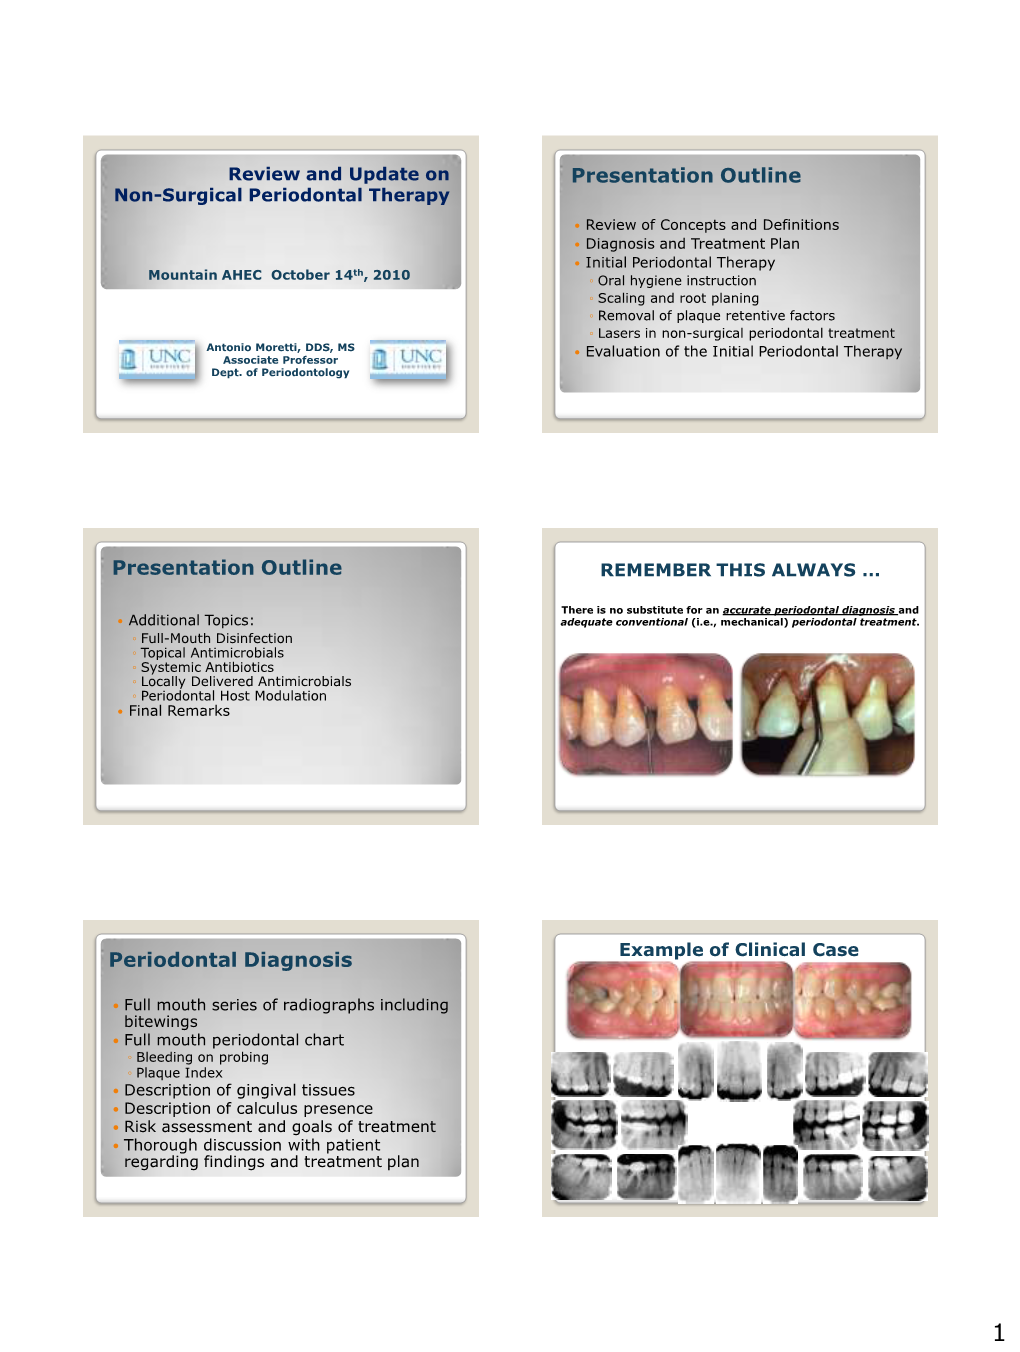 Non-Surgical Periodontal Therapy